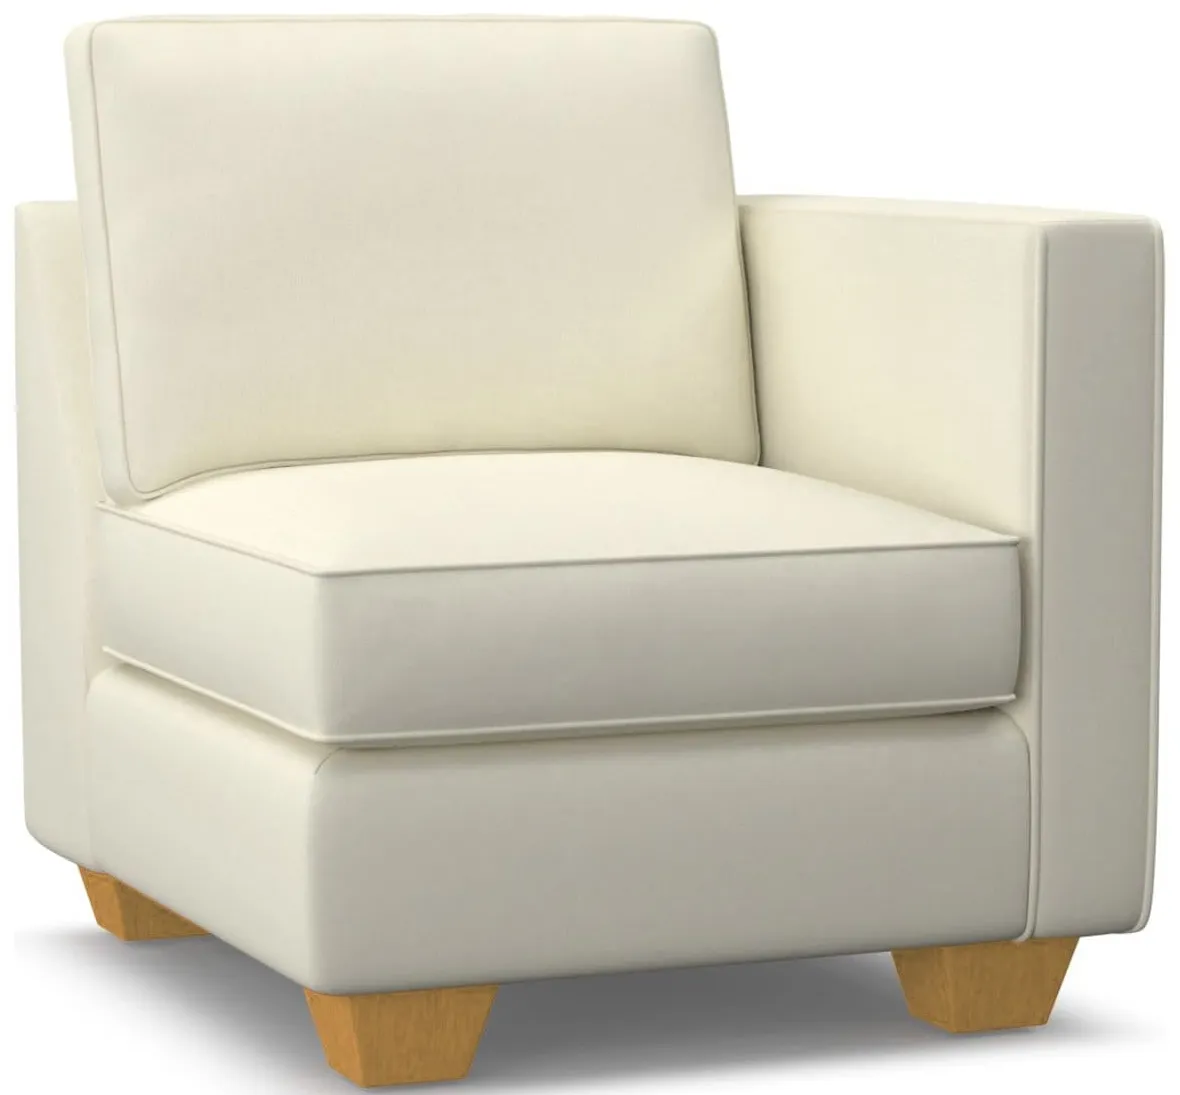 Catalina Right Arm Chair